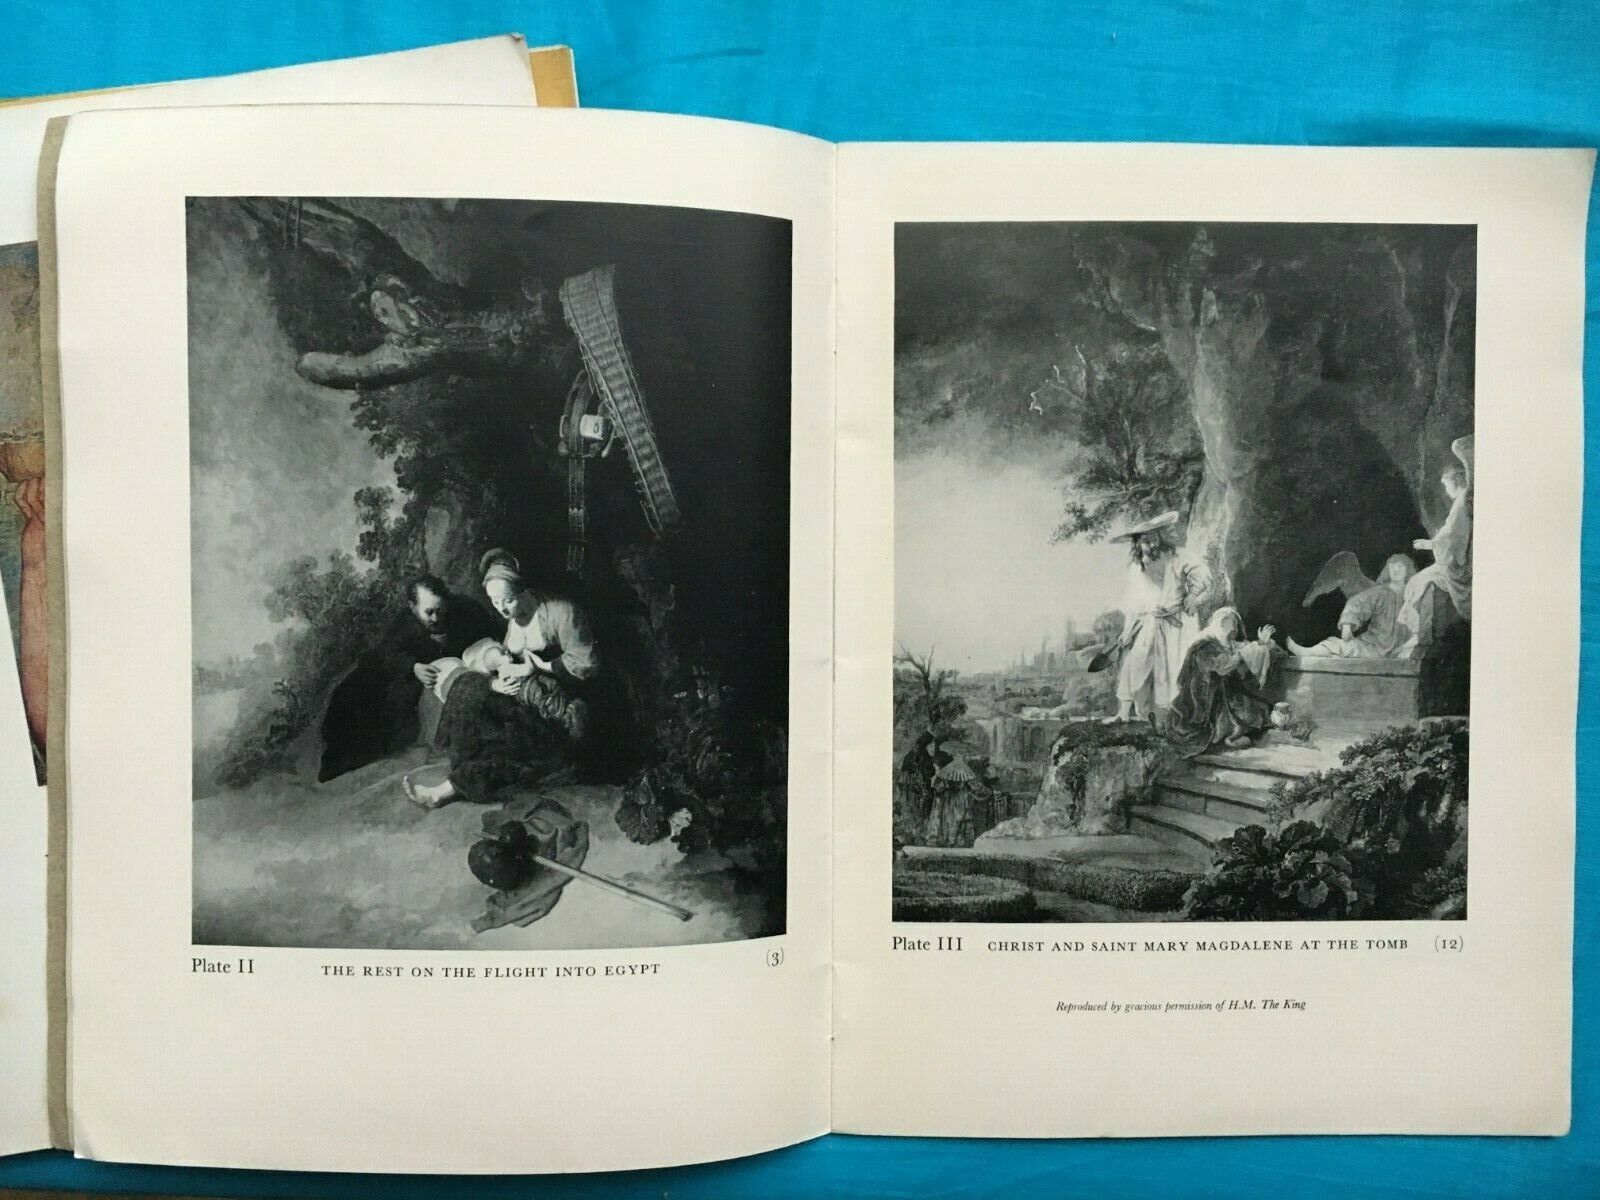 Pollok House,Stirling Maxwell Coll'n: Burrell Coll'n + 2 other Art Catalogues. Без бренда - фотография #6